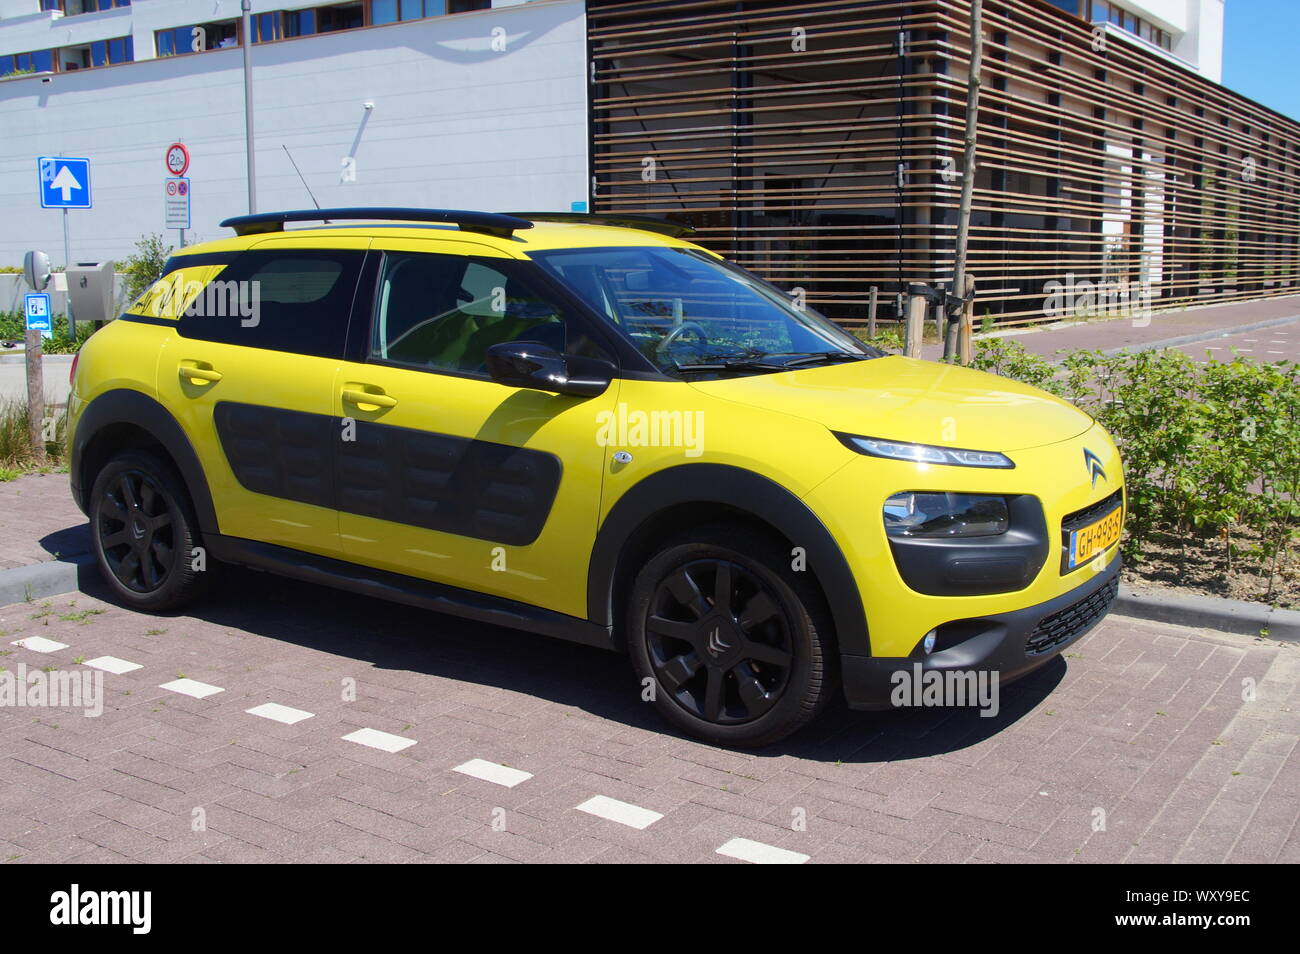 Almere, The Netherlands - May 25, 2017: Yellow Citroën C4 Cactus parked in a public parking lot. Stock Photo